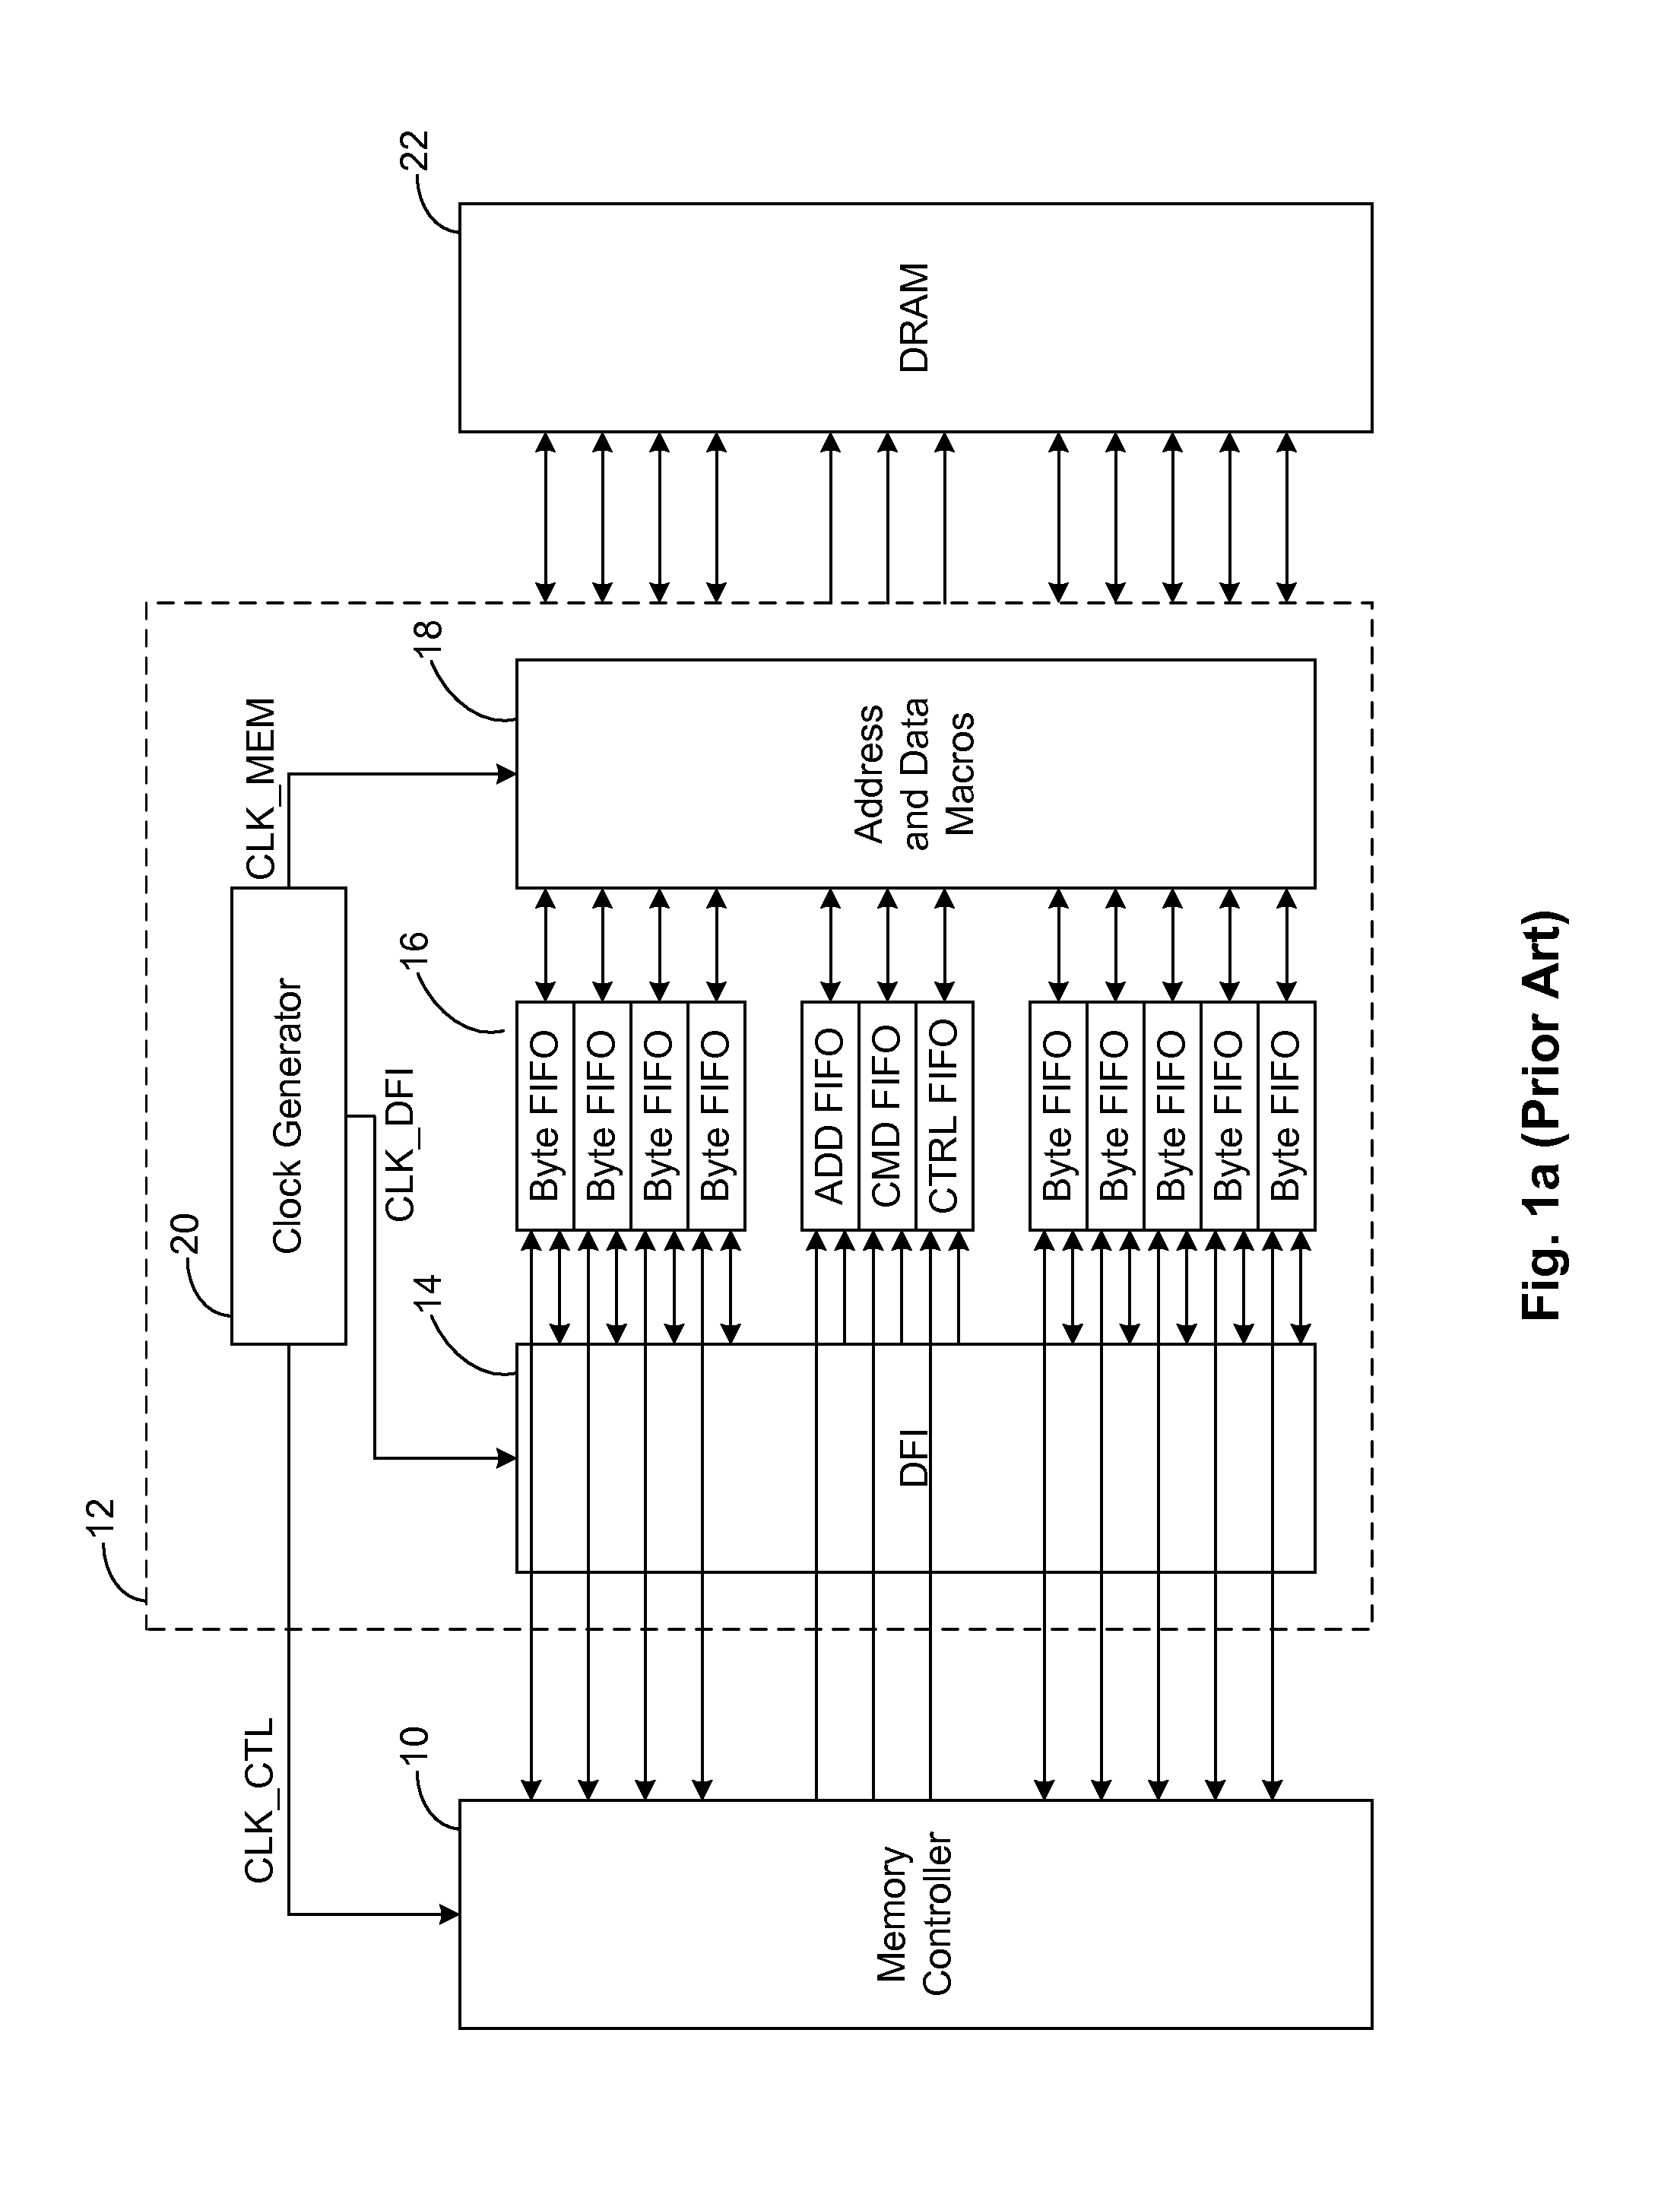 Methods and Systems for Distributing Clock and Reset Signals